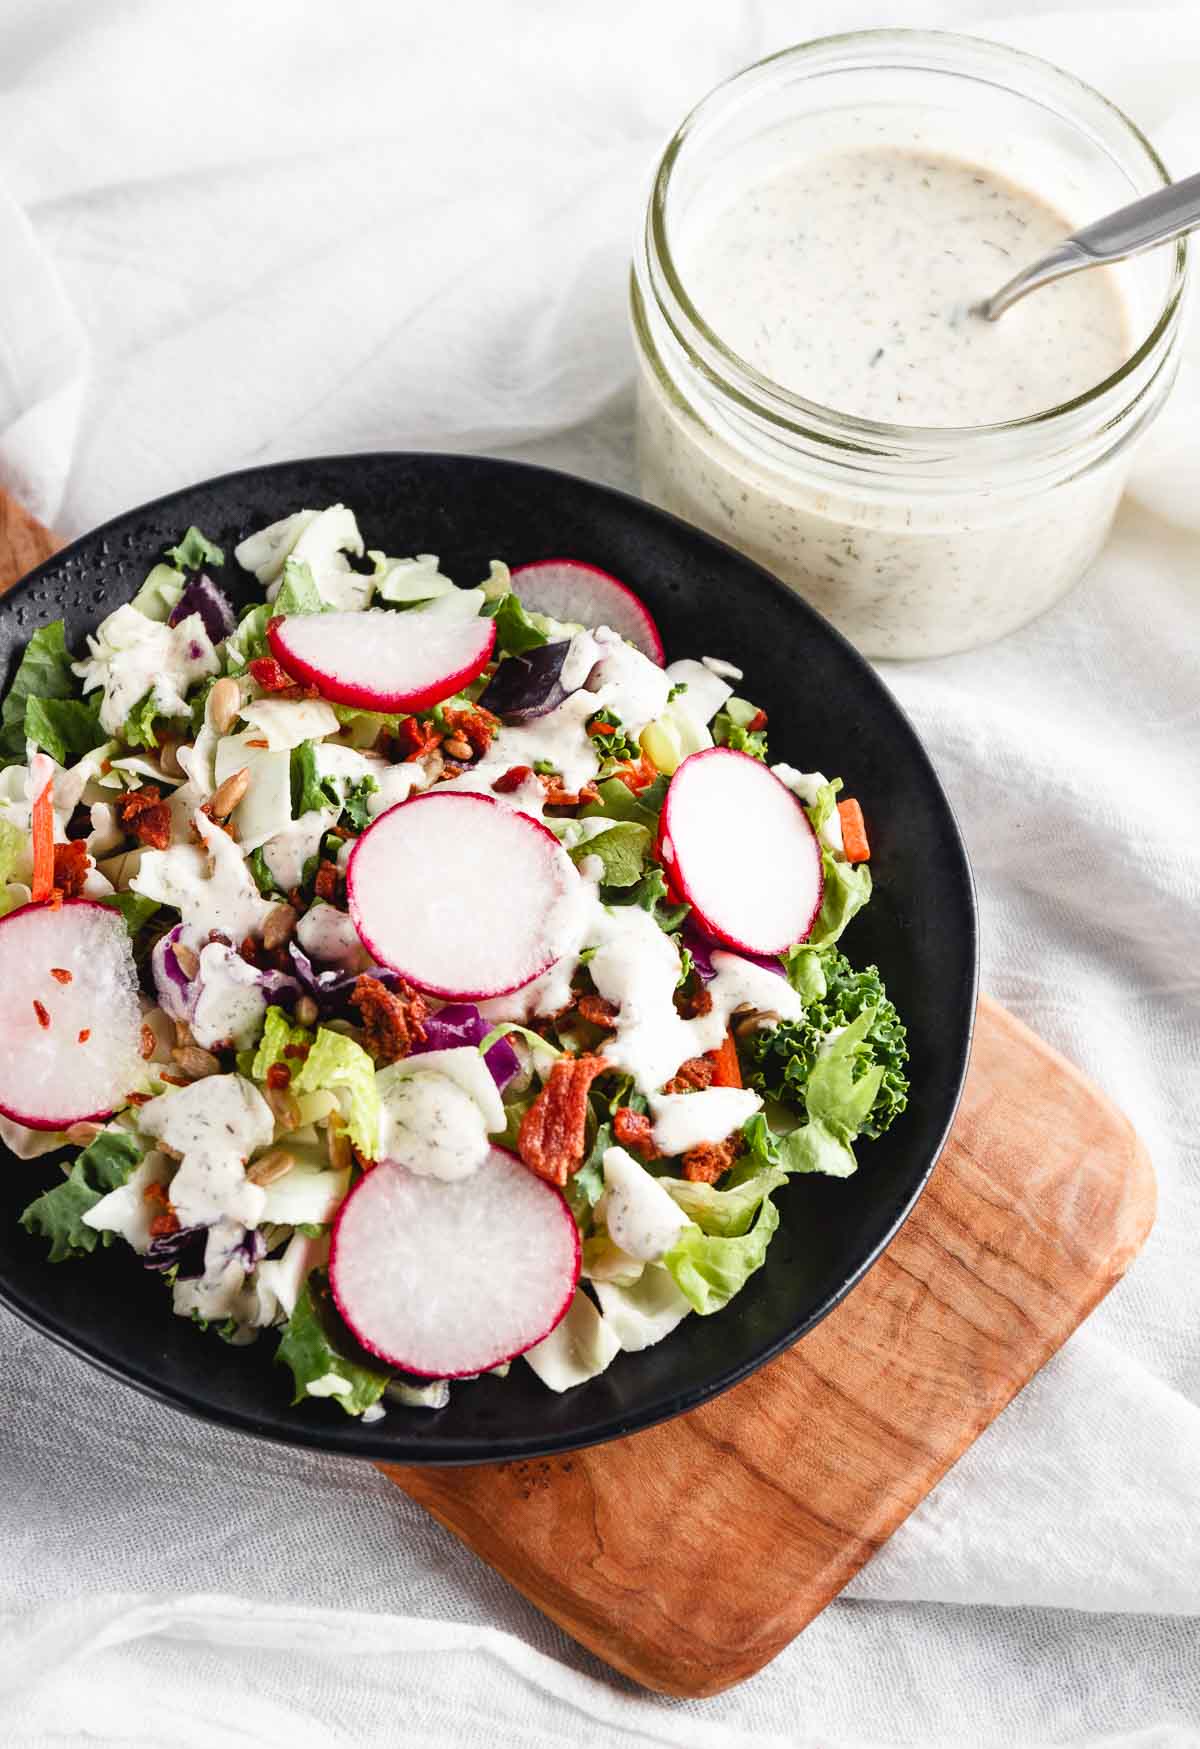 Serving a salad with the ranch dressing.